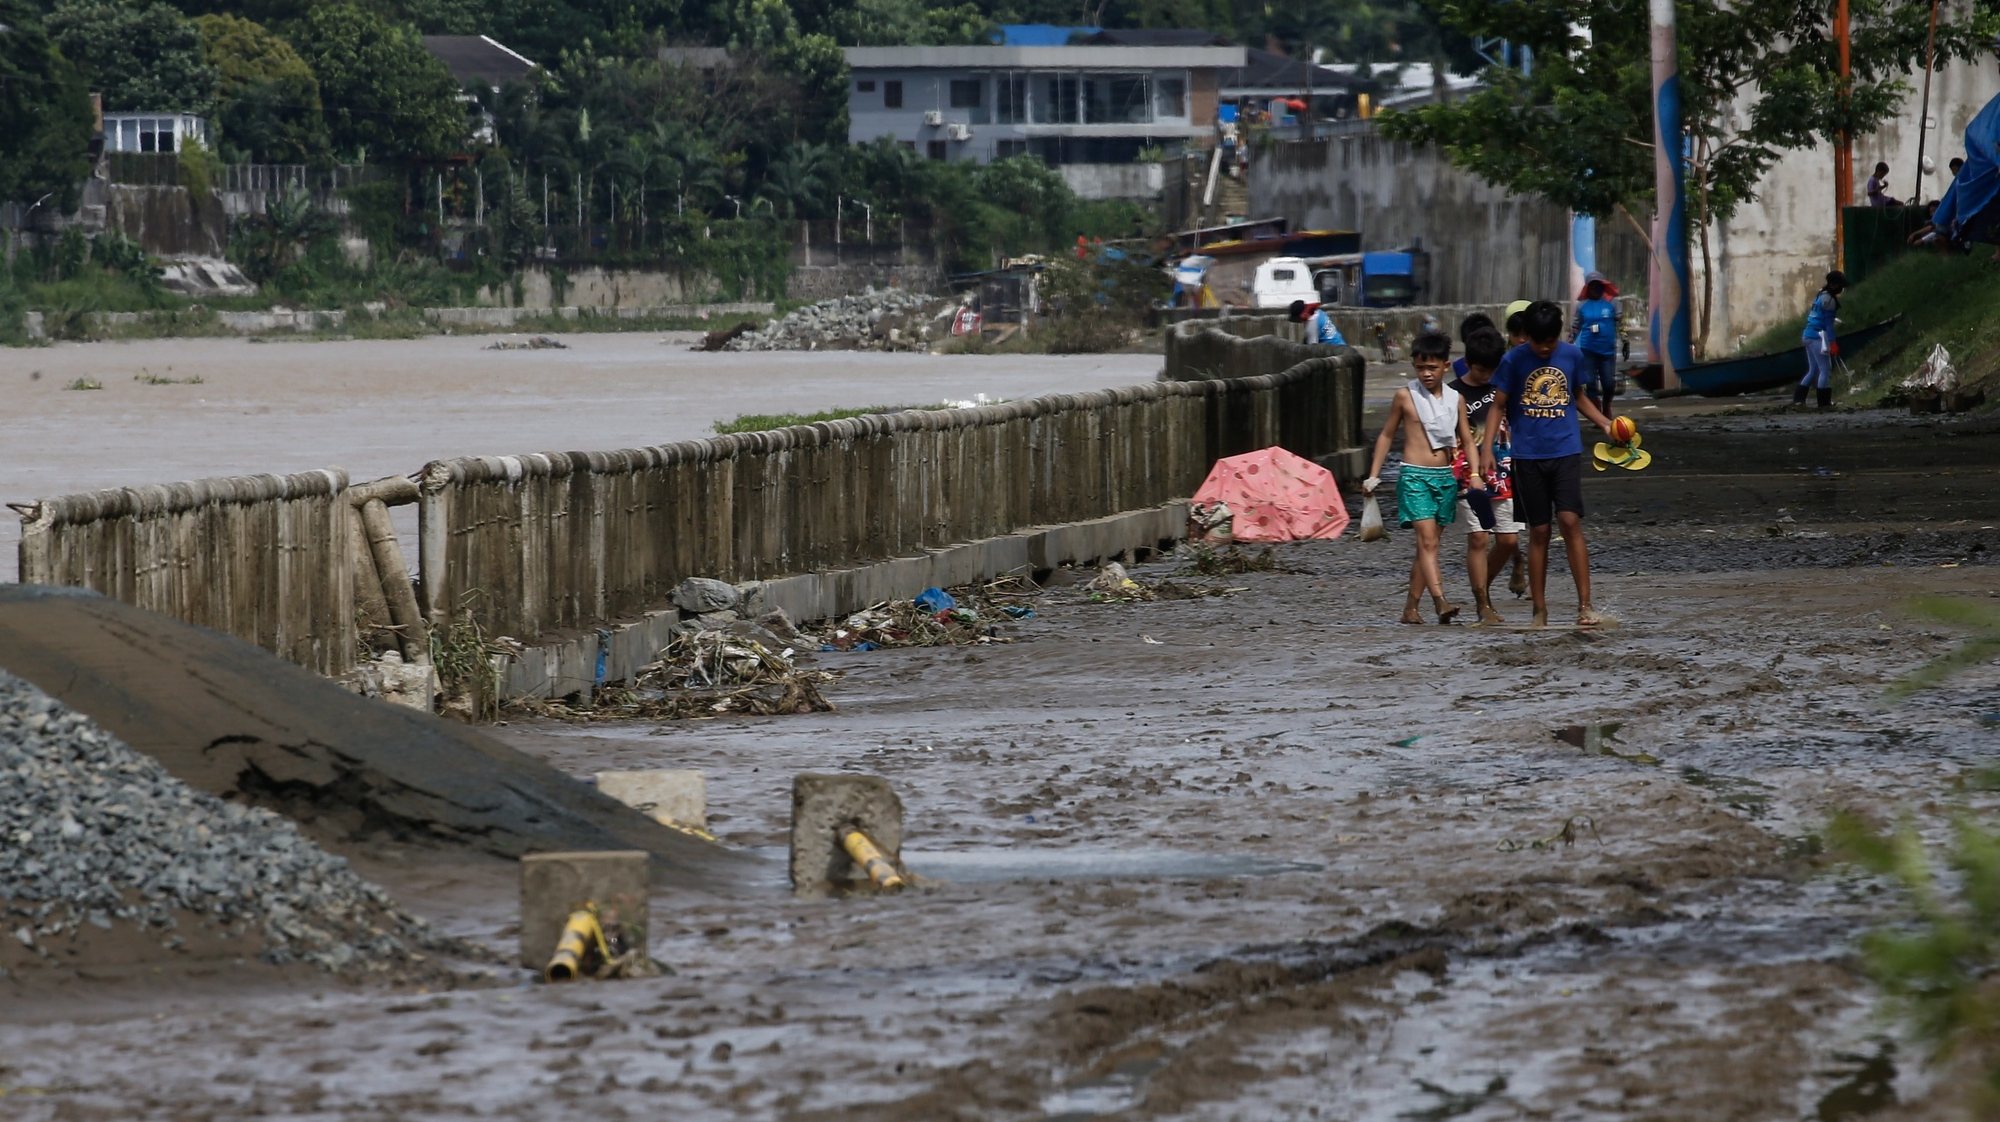 epa10274706 Children walk along a muddied path a day after rains caused by Typhoon Nalgae flooded a riverside park in Marikina City, Metro Manila, Philippines 30 October 2022. Heavy rains brought by Typhoon Nalgae killed 45 people and injured a dozen as it crossed various provinces of the Philippines, according to the National Disaster Risk Reduction and Management Council (NDRRMC).  EPA/ROLEX DELA PENA